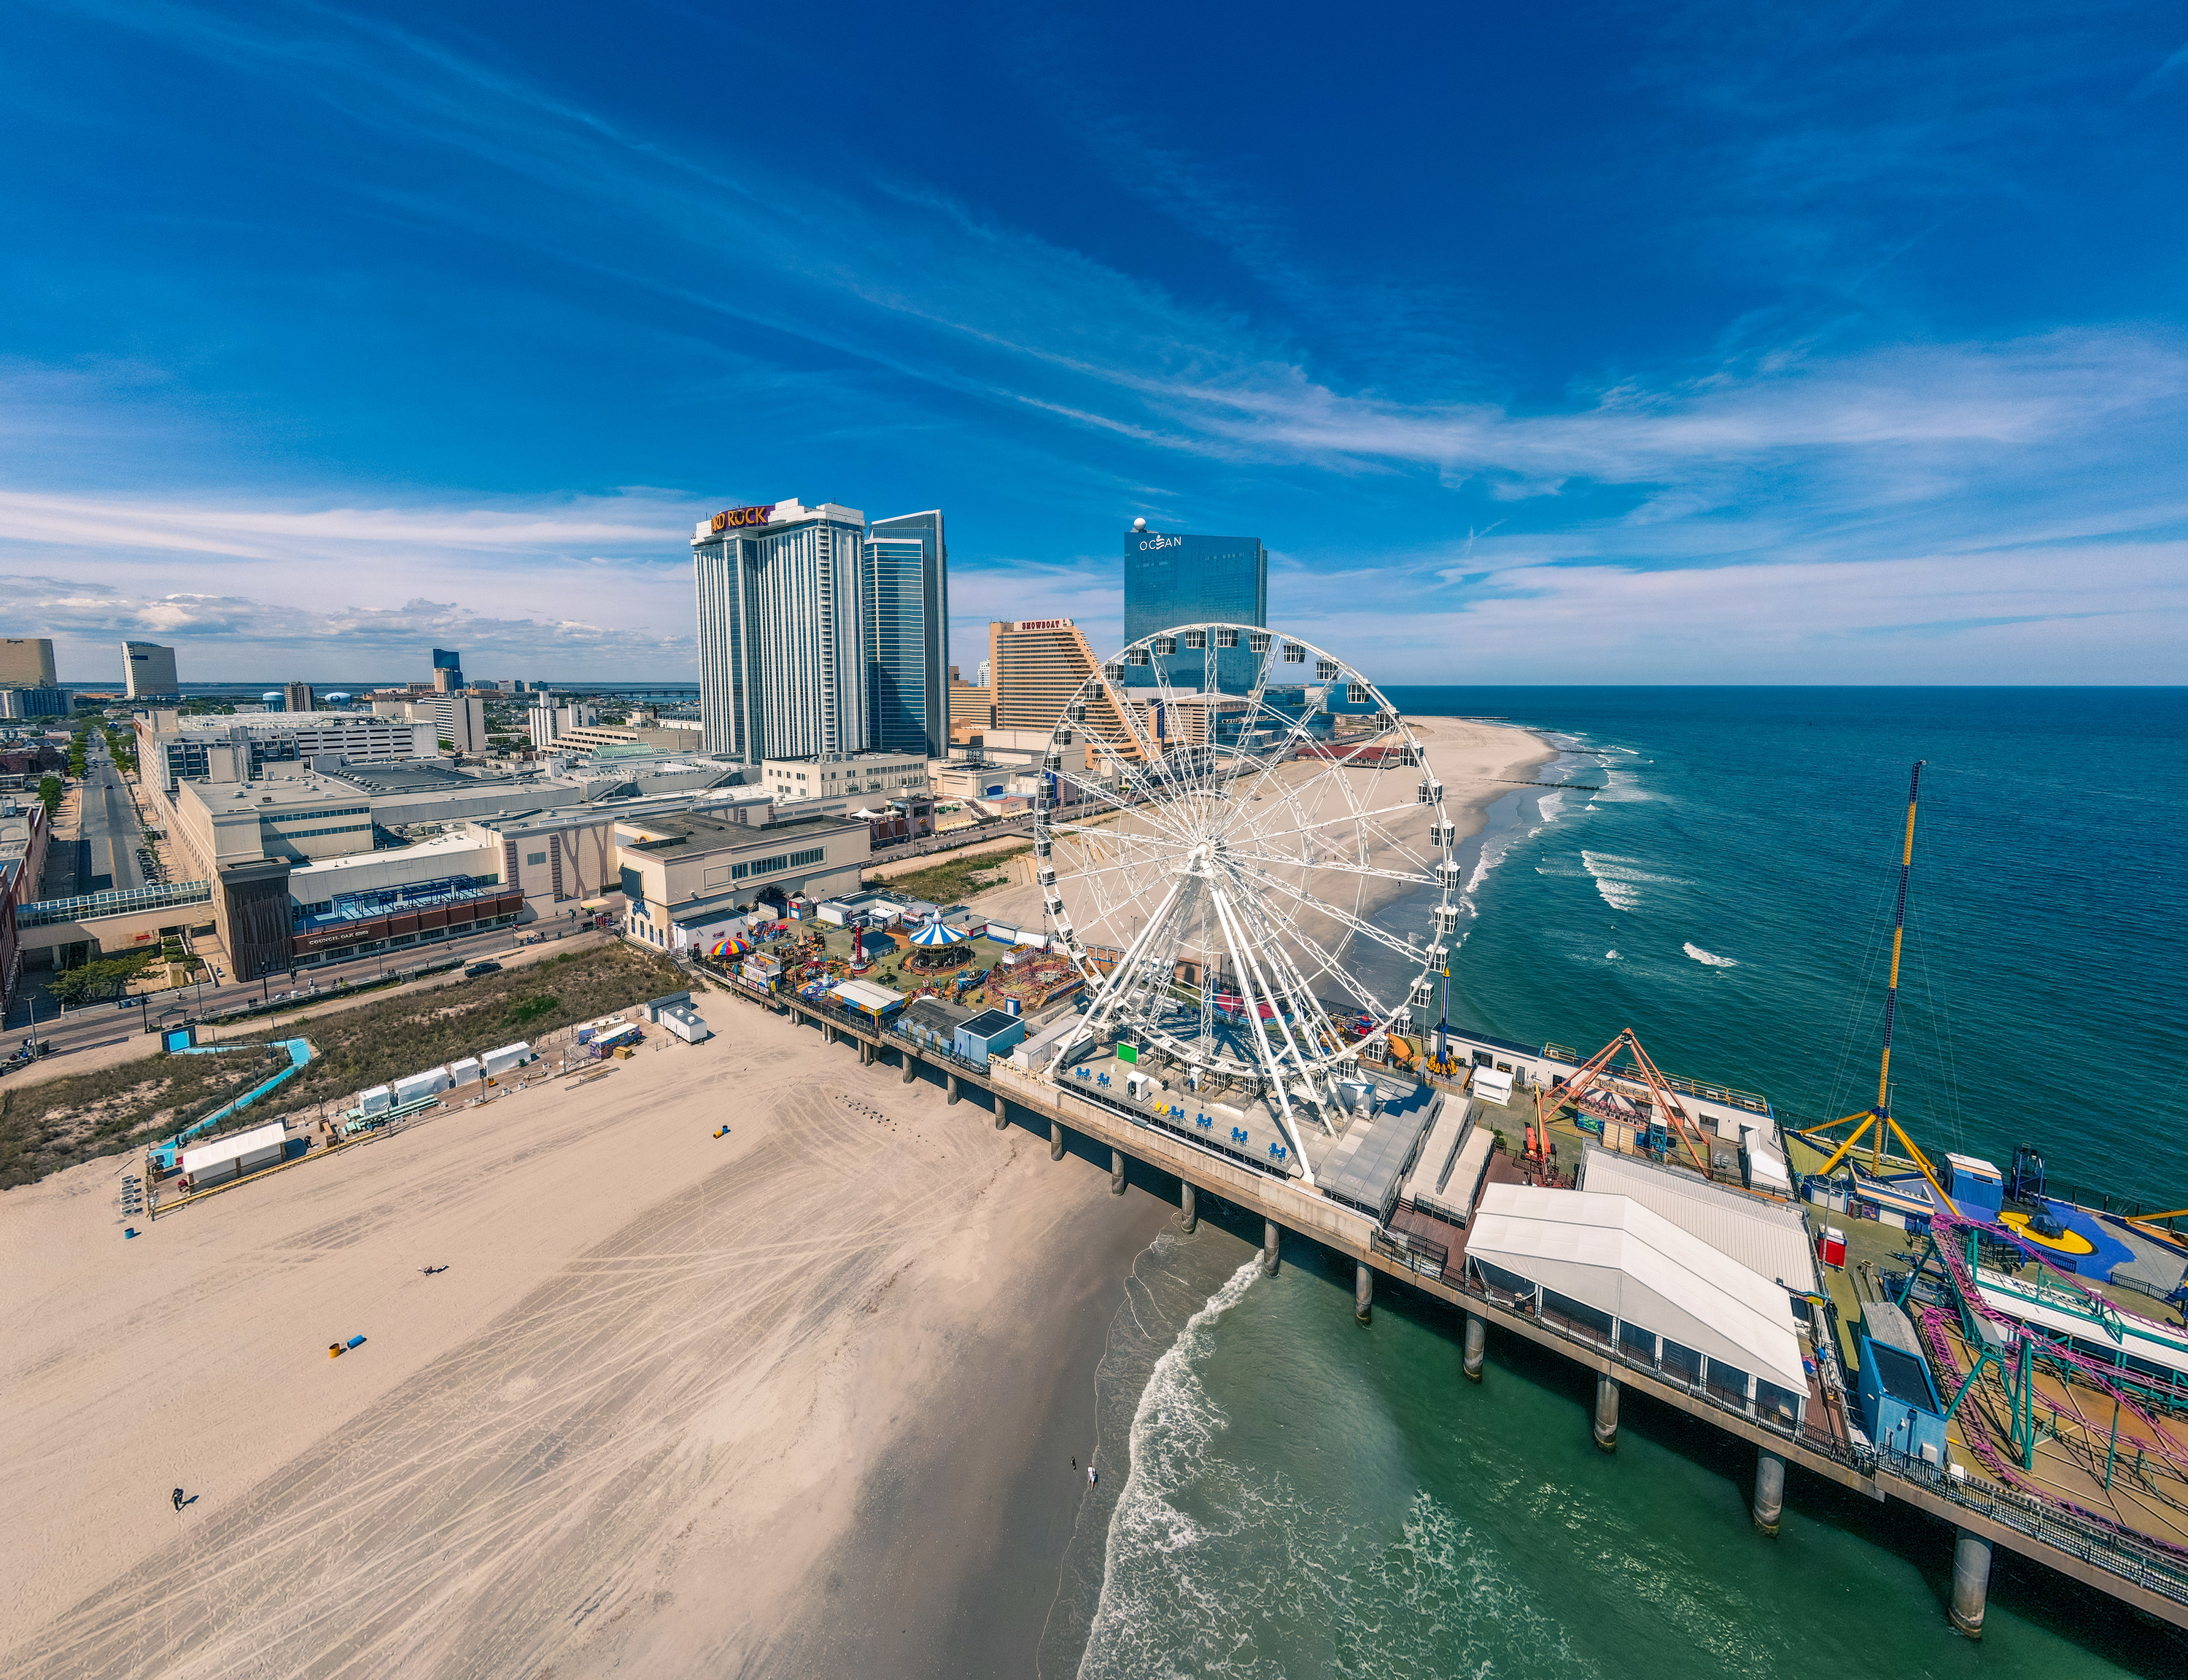 An aerial view of the Atlantic City boardwalk and rides